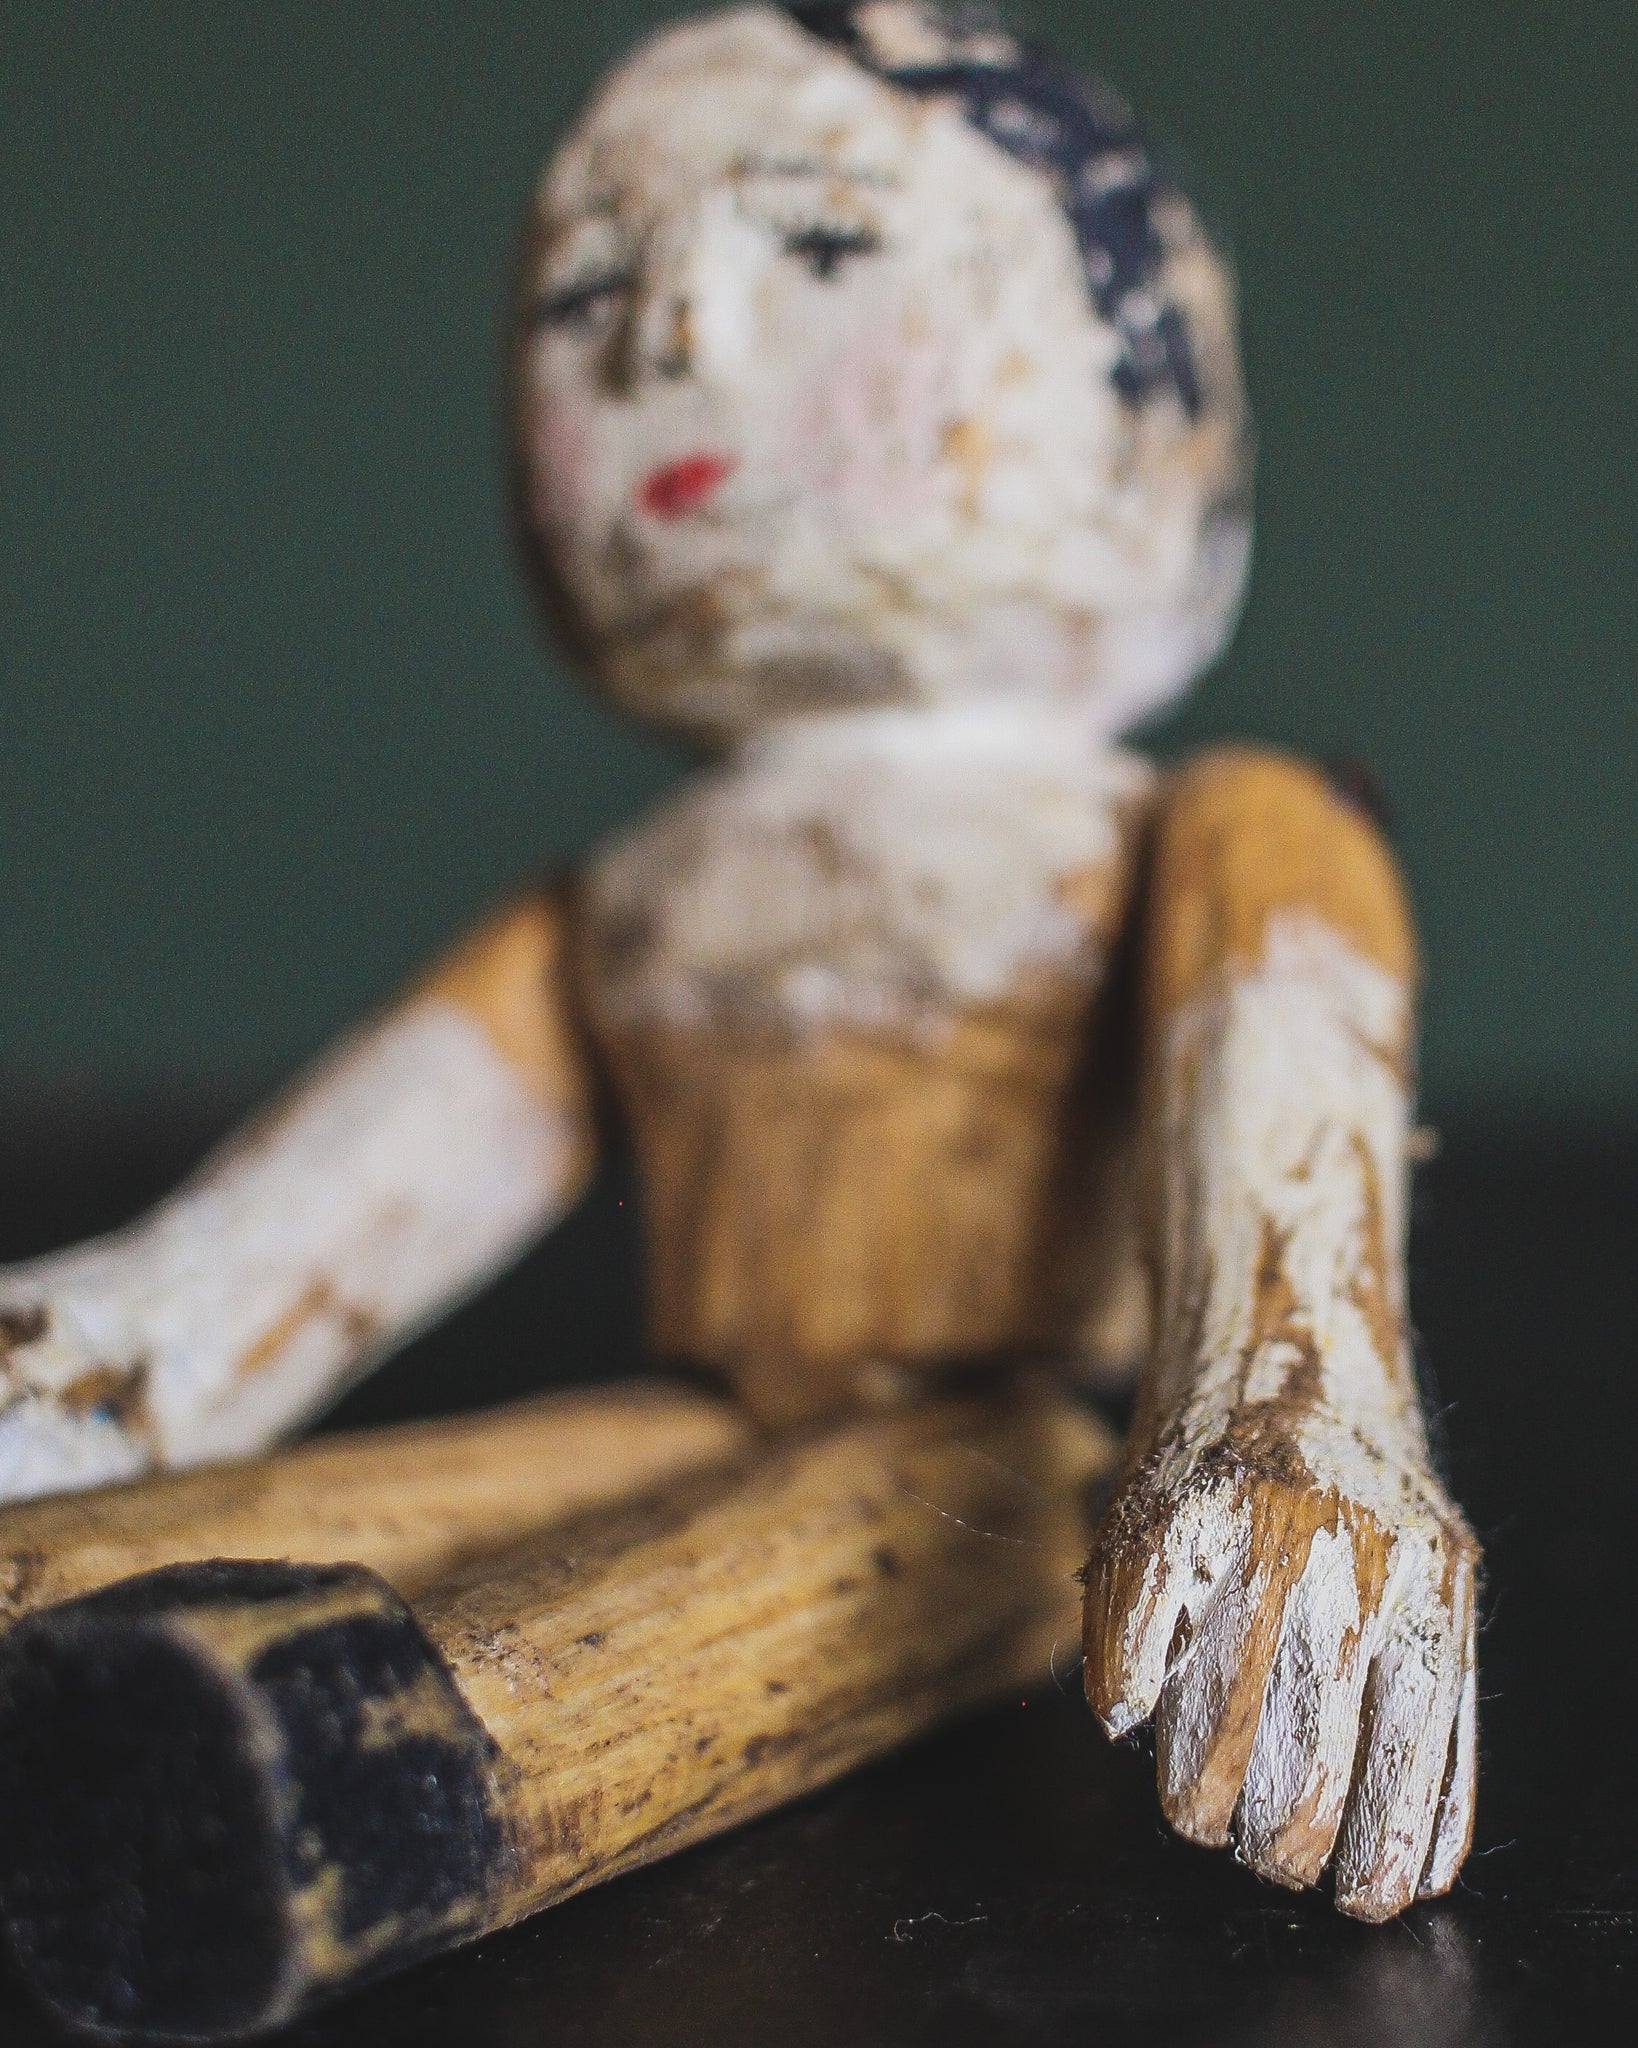 Hand Carved Articulated Doll